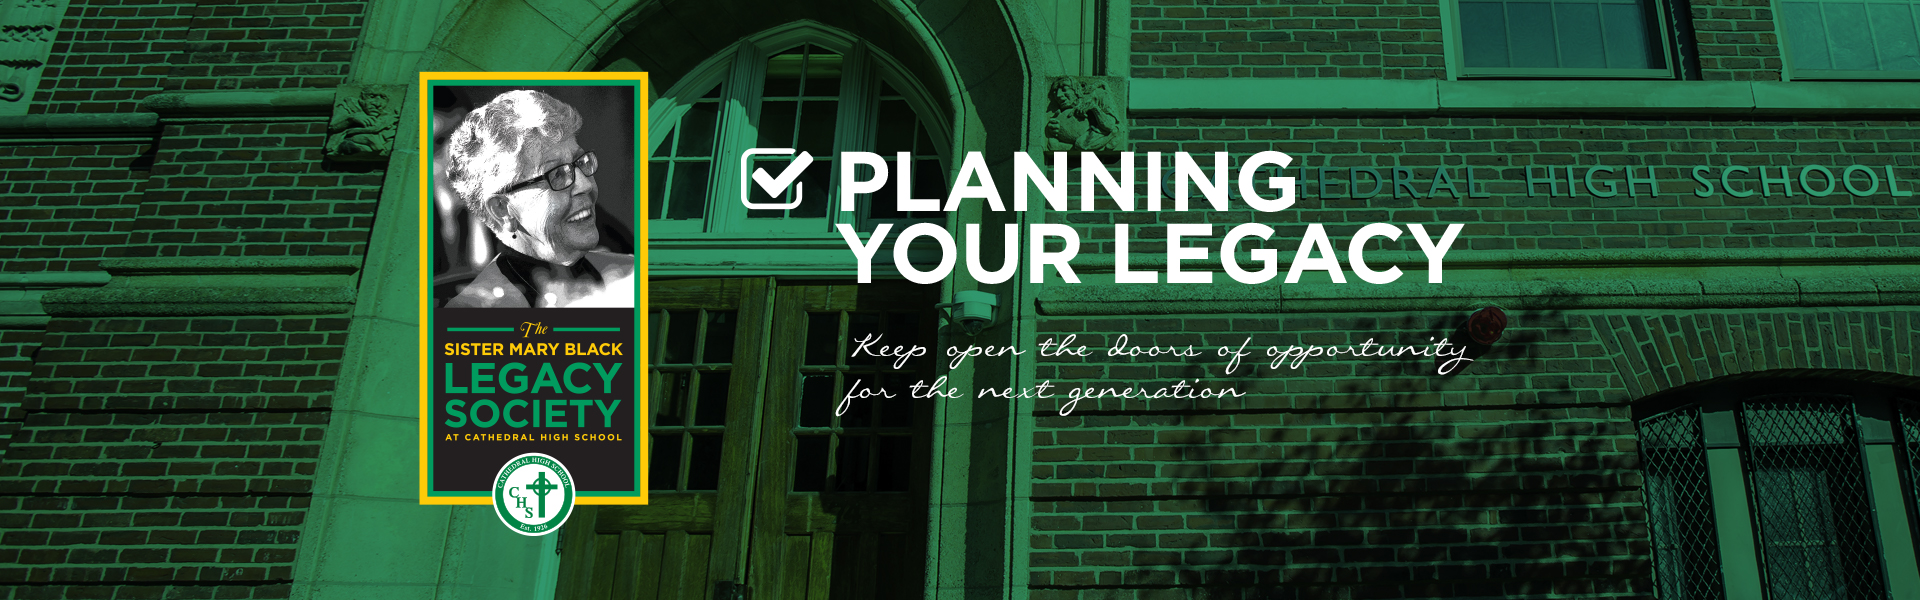 Sister Mary Black Legacy Society: Planning Your Legacy. Open the door of opportunity for the future generation.